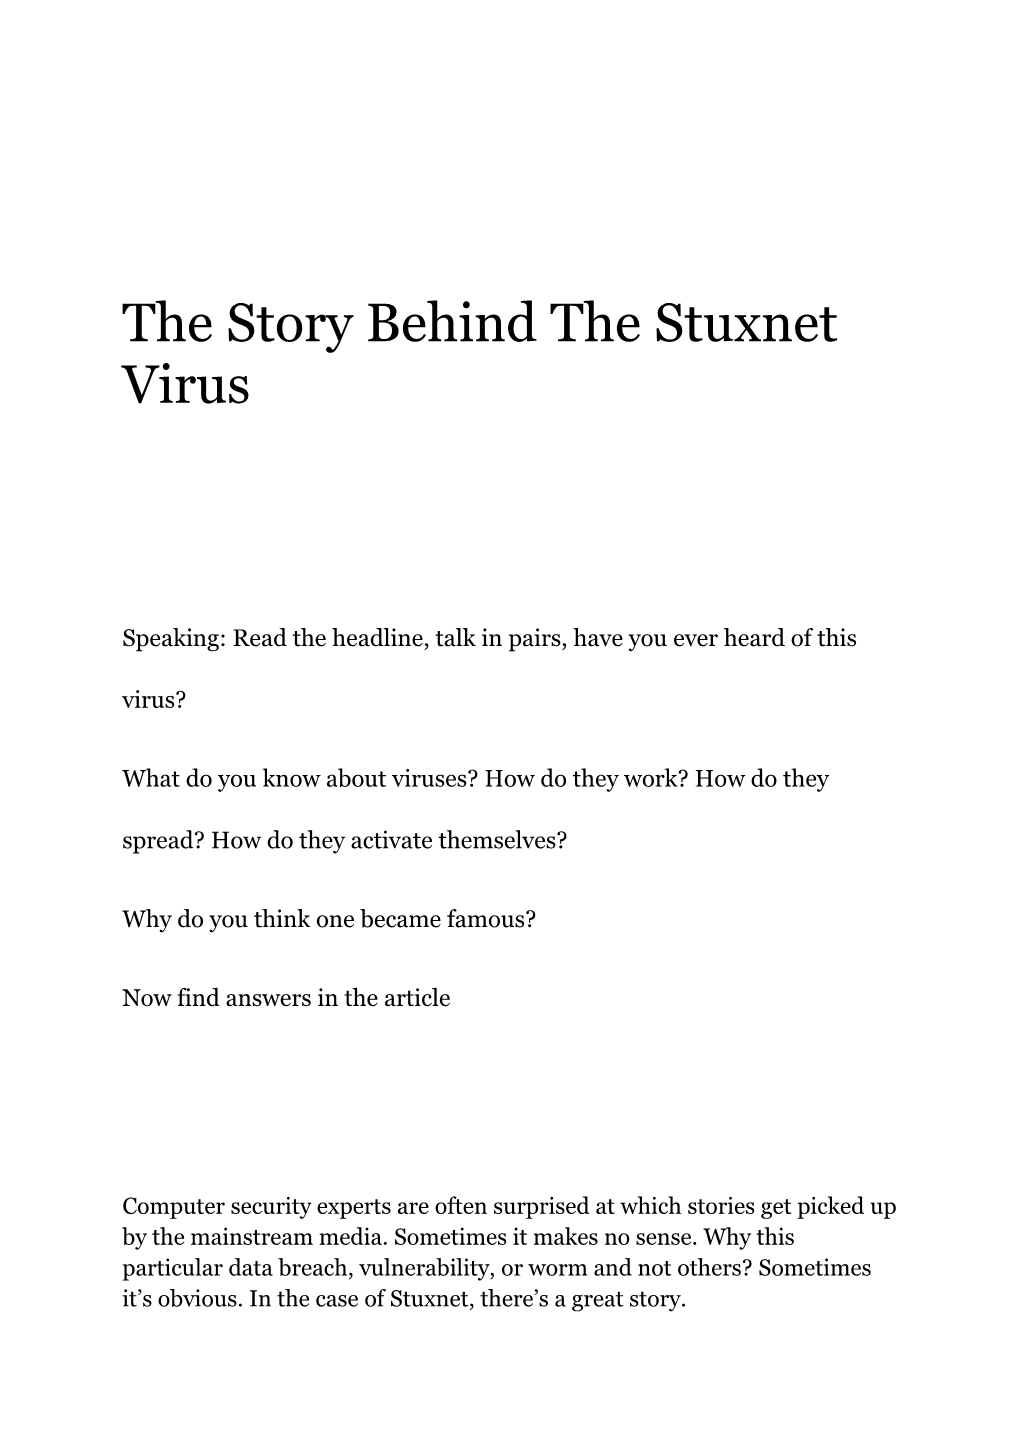 The Story Behind the Stuxnet Virus